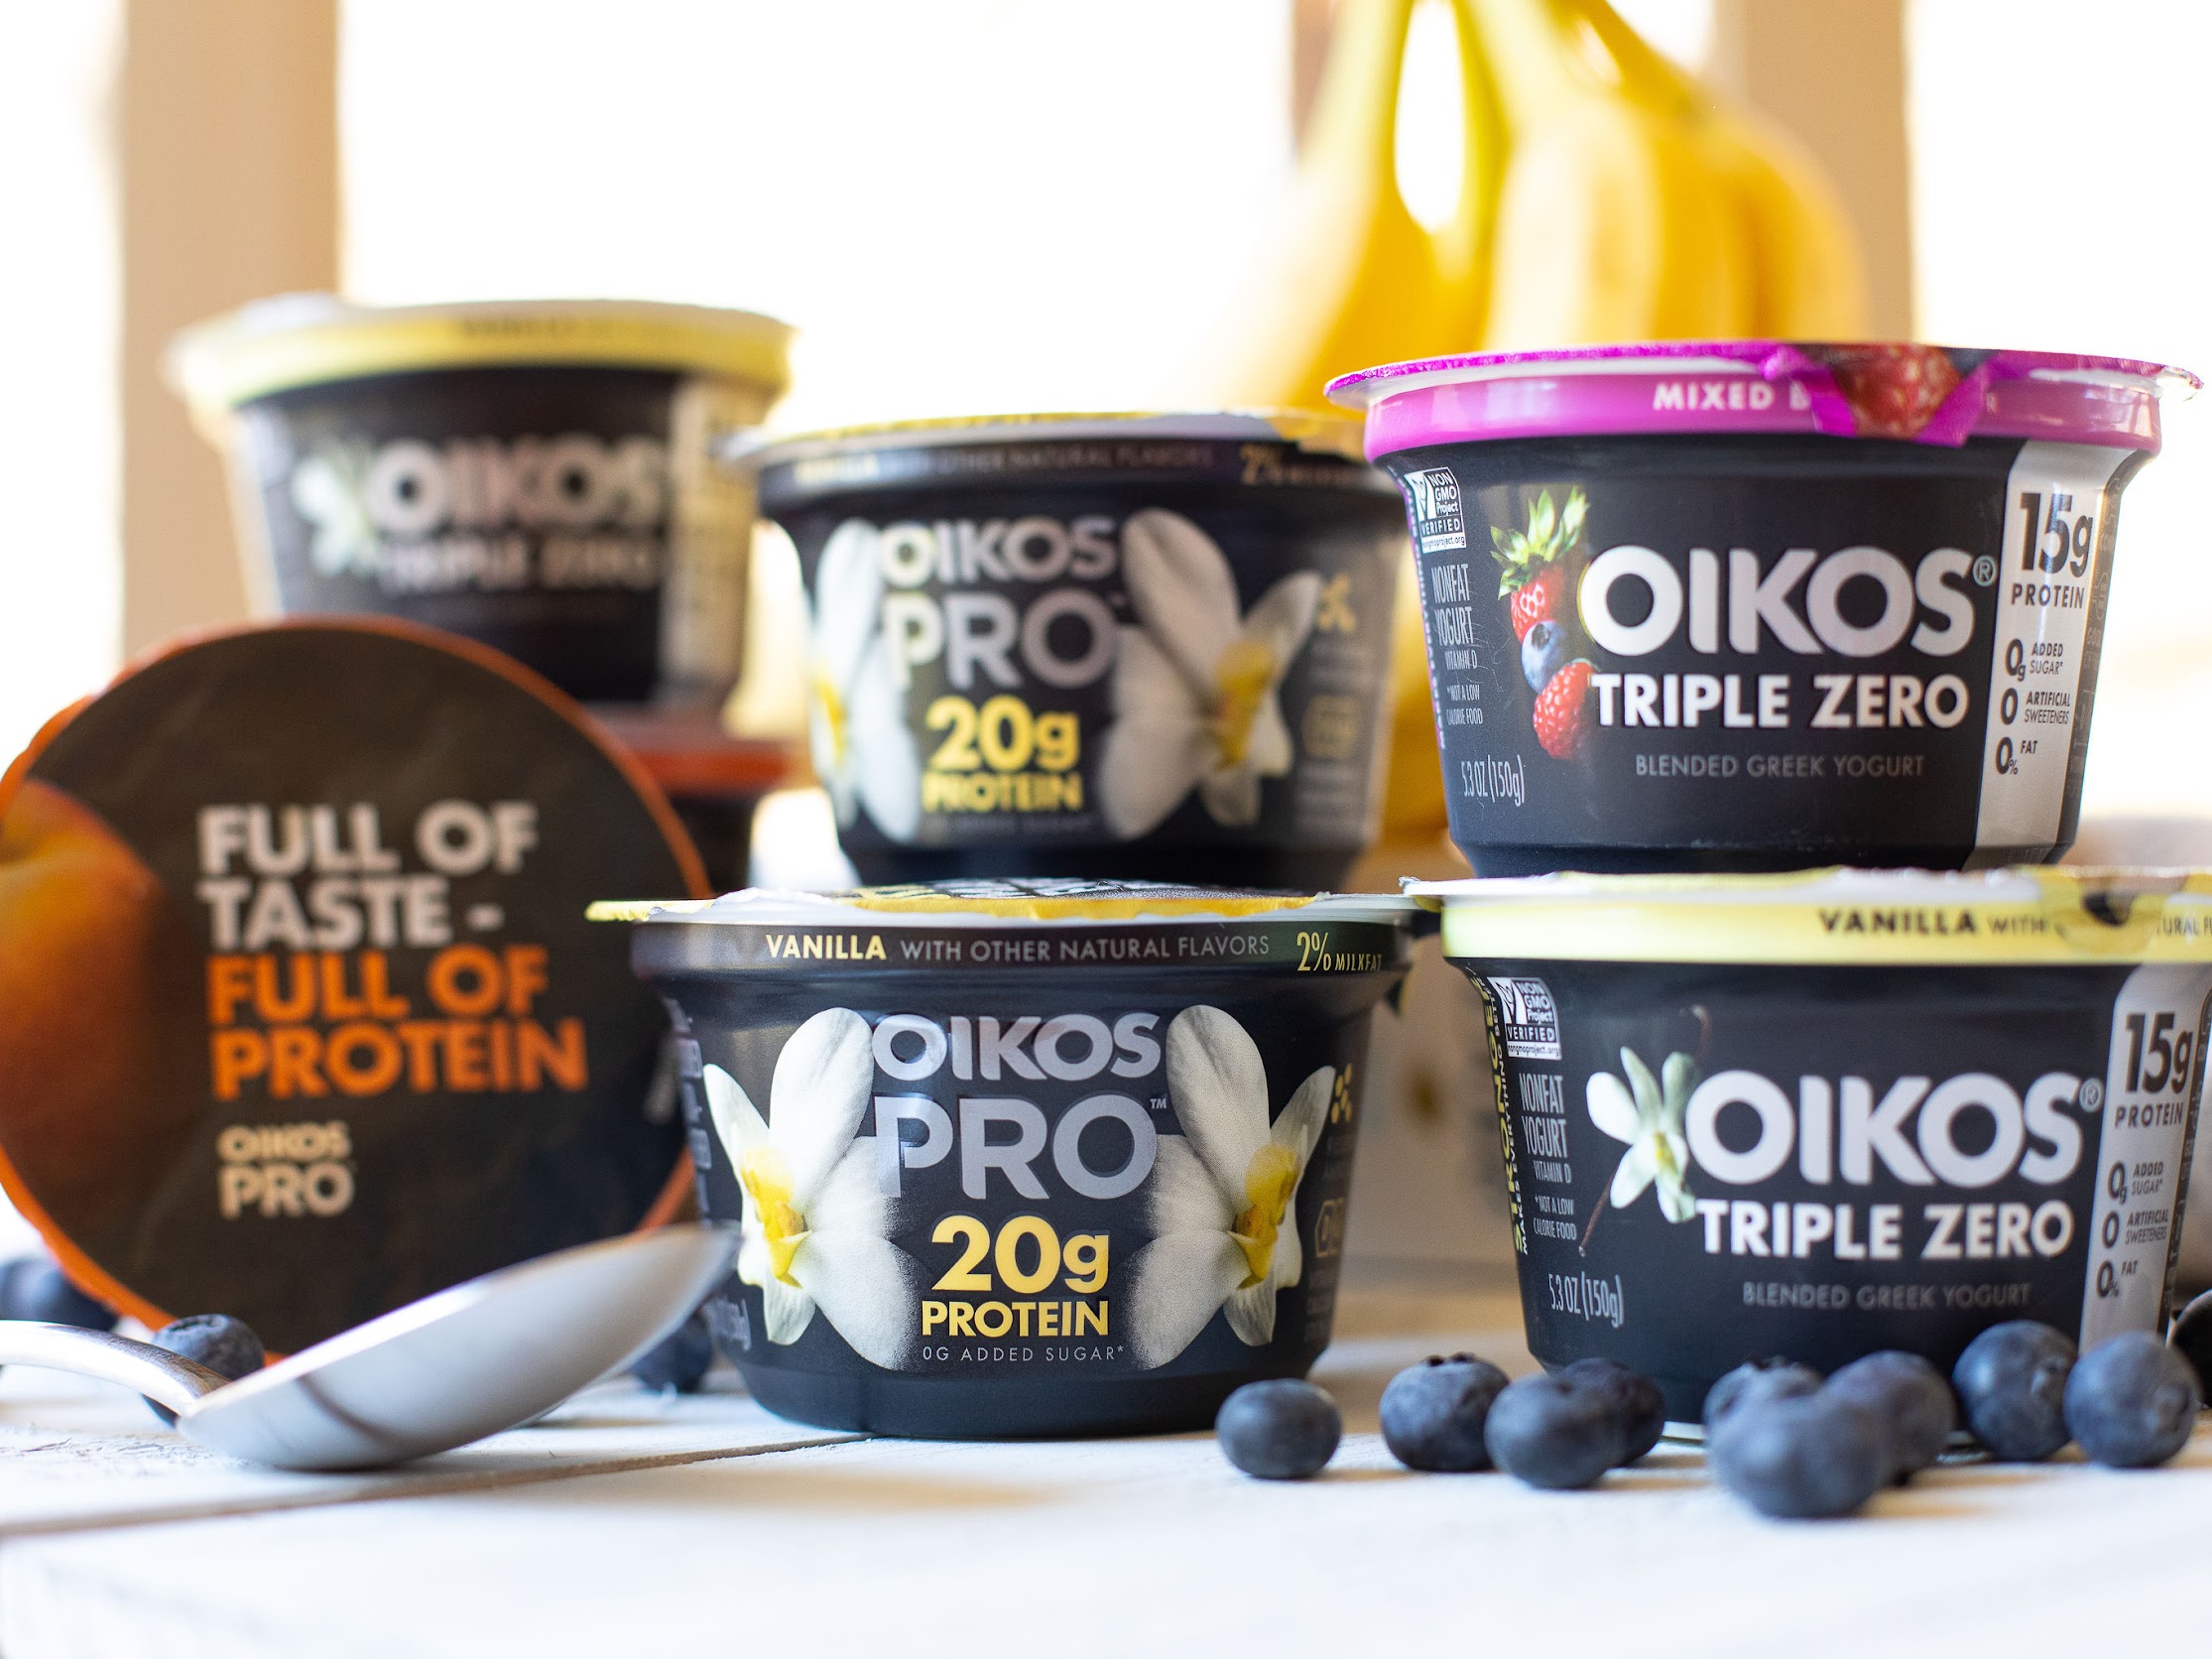 Stock Up On Oikos® Triple Zero And Pro Greek Yogurt - All The Delicious Varieties Are On Sale 10/$10 At Publix on I Heart Publix